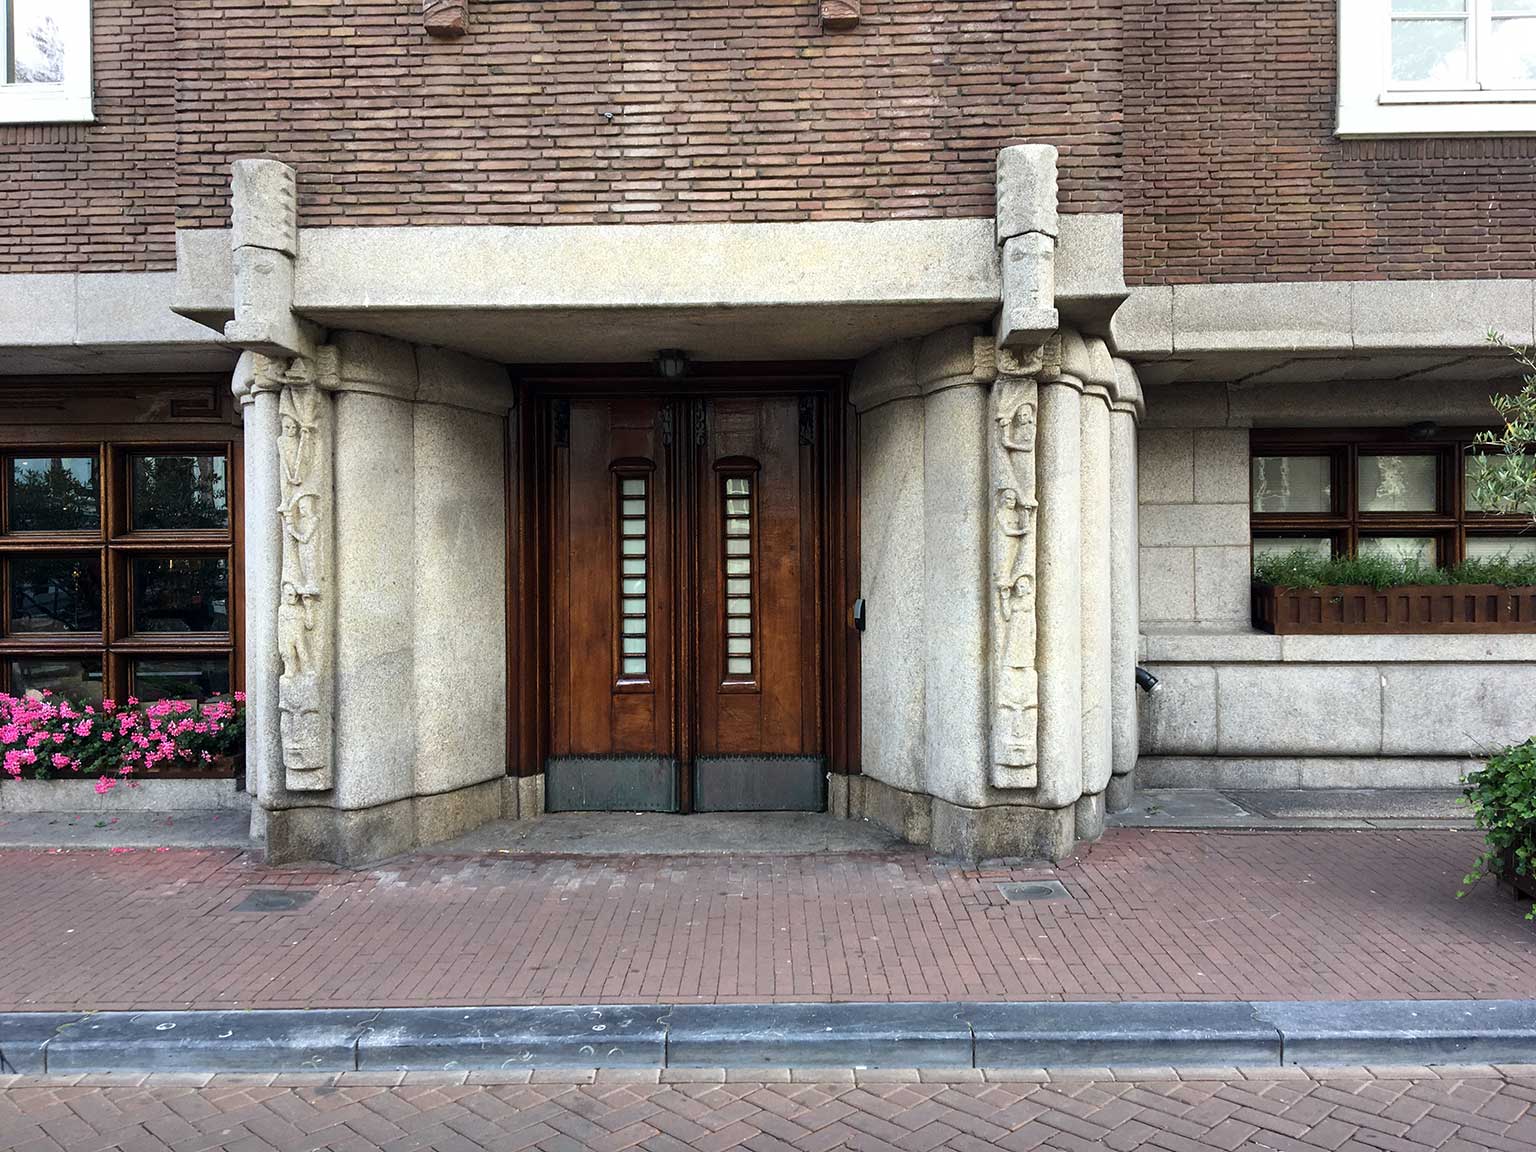 Entrance to the new wing of the old city hall on Oudezijds Voorburgwal, Amsterdam